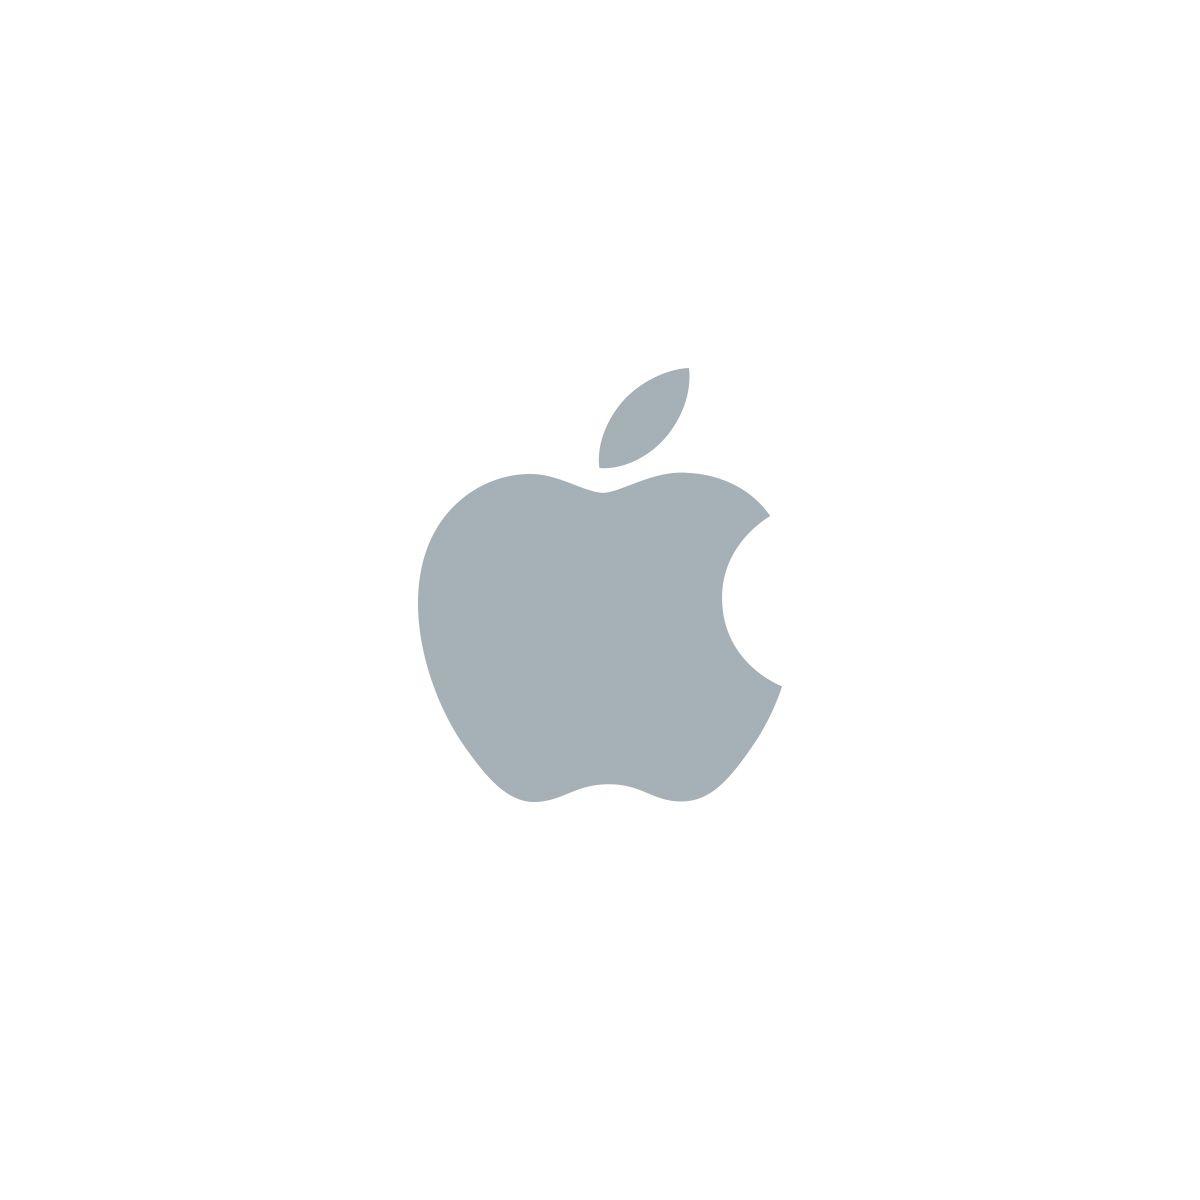 Official iOS Logo - iTunes - Upgrade to Get iTunes Now - Apple